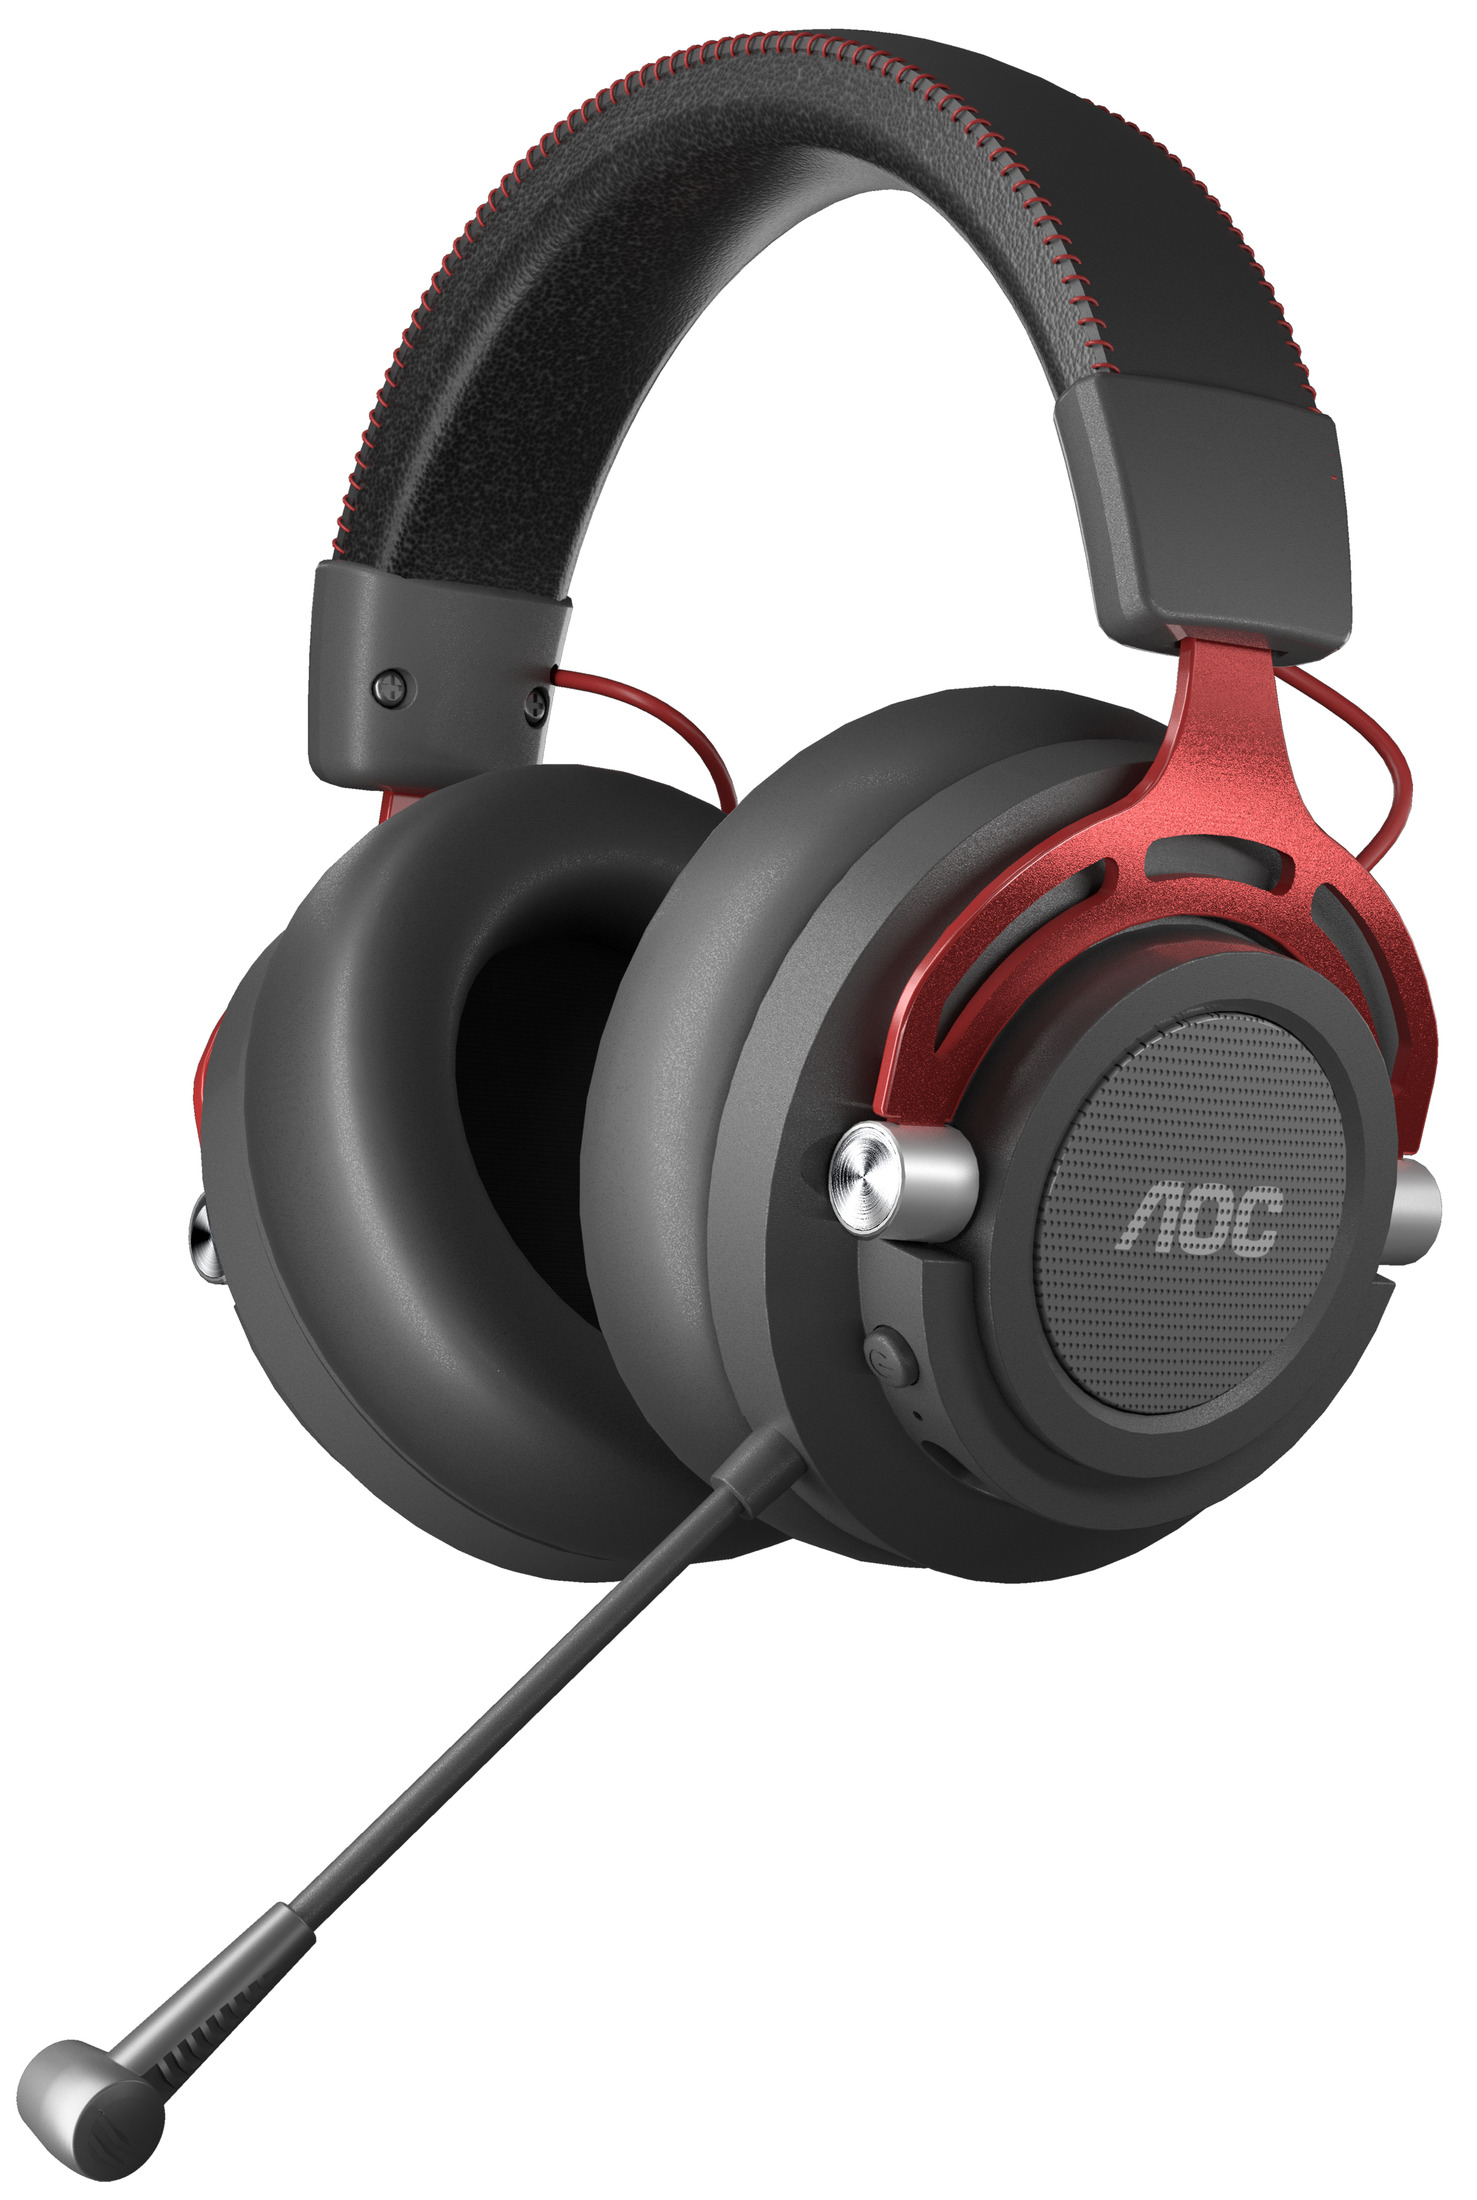 CABLE Headset AOC Gaming Over-ear 3.5MM Bluetooth WIRELESS + HEADSET, GAMING GH401 Grau/Rot